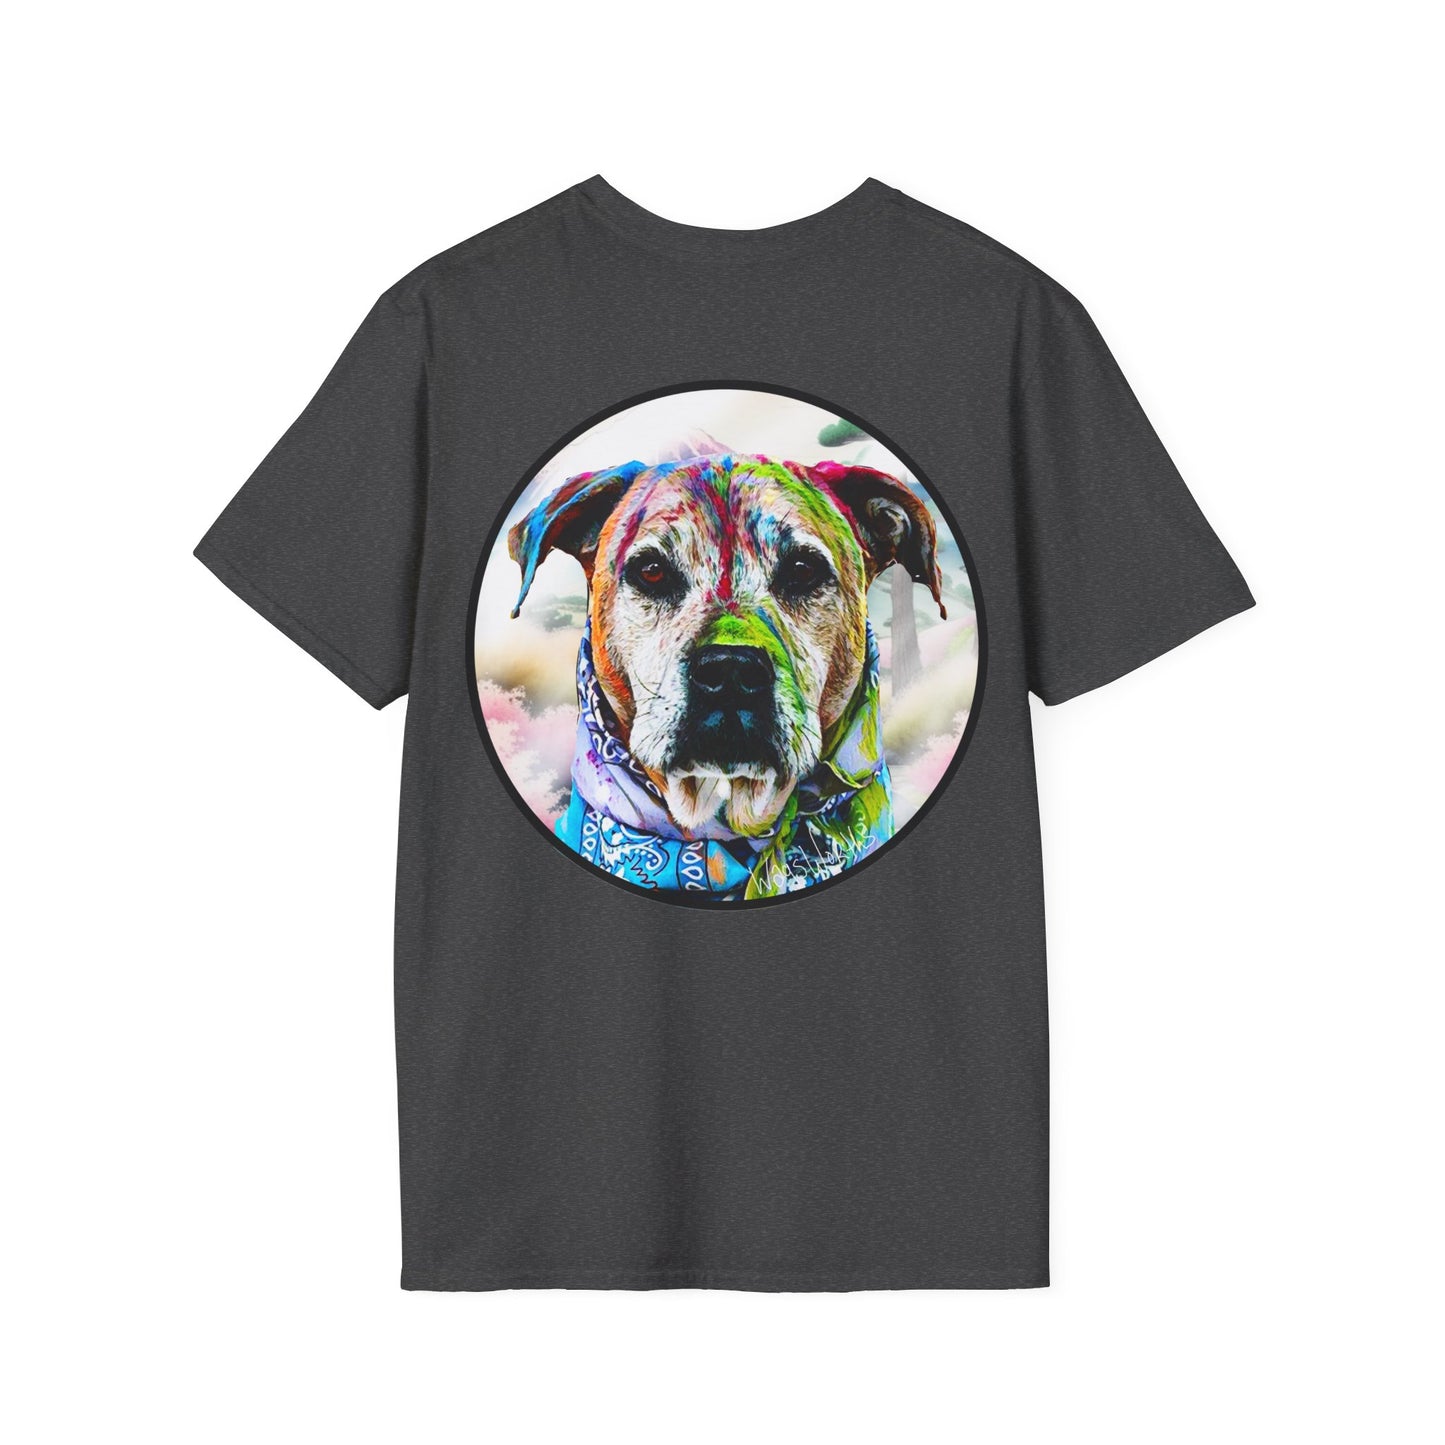 Zola in Oil Graphic Tee